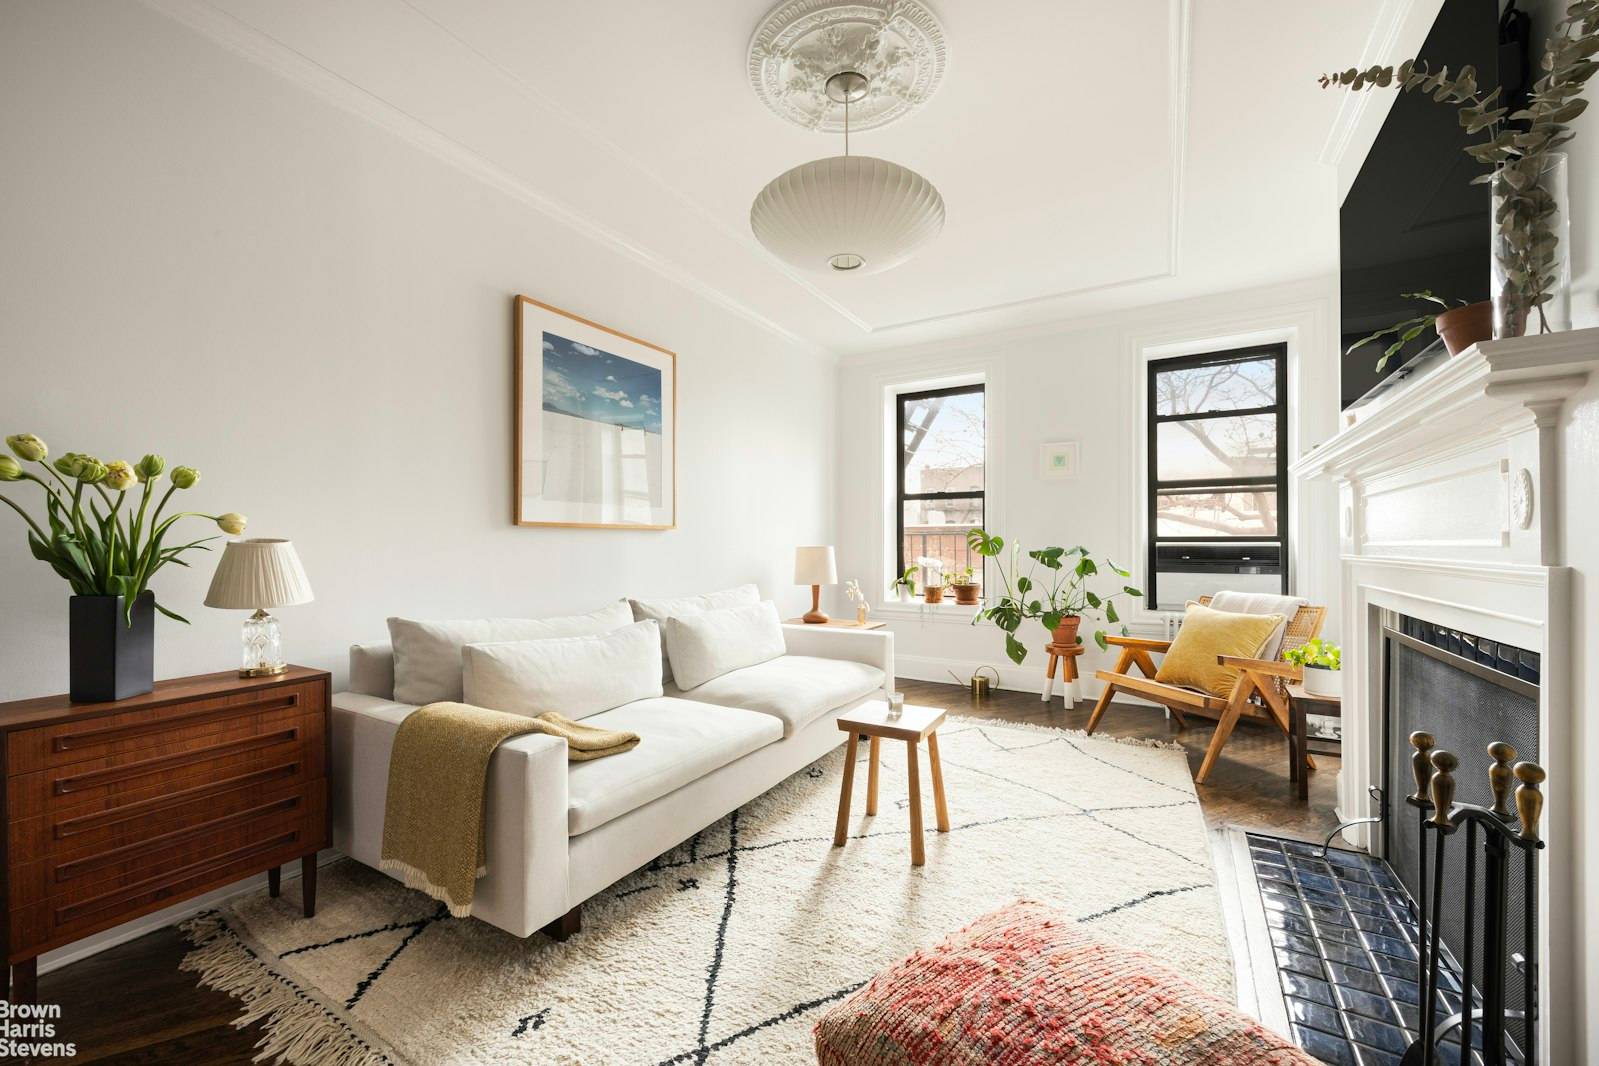 This beautiful architect renovated apartment will steal your heart the moment you enter its generous light filled living quarters marked by soaring ceilings, rich wood floors, tasteful built ins, and ...